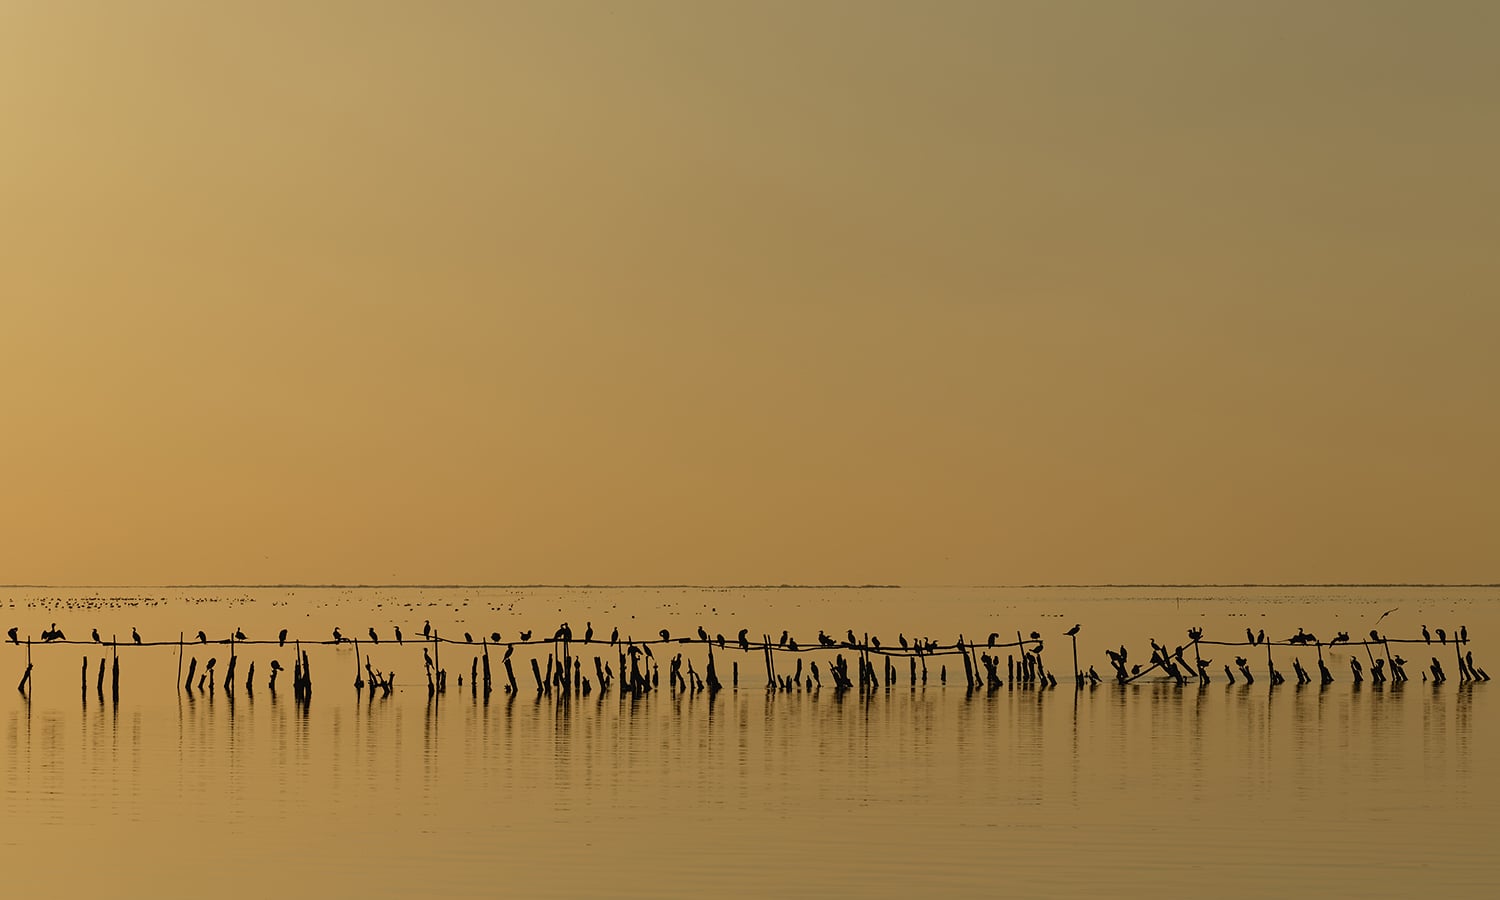 cormorants at dusk on the pond of Vaccarès, France. — Photo by Ddeveze,